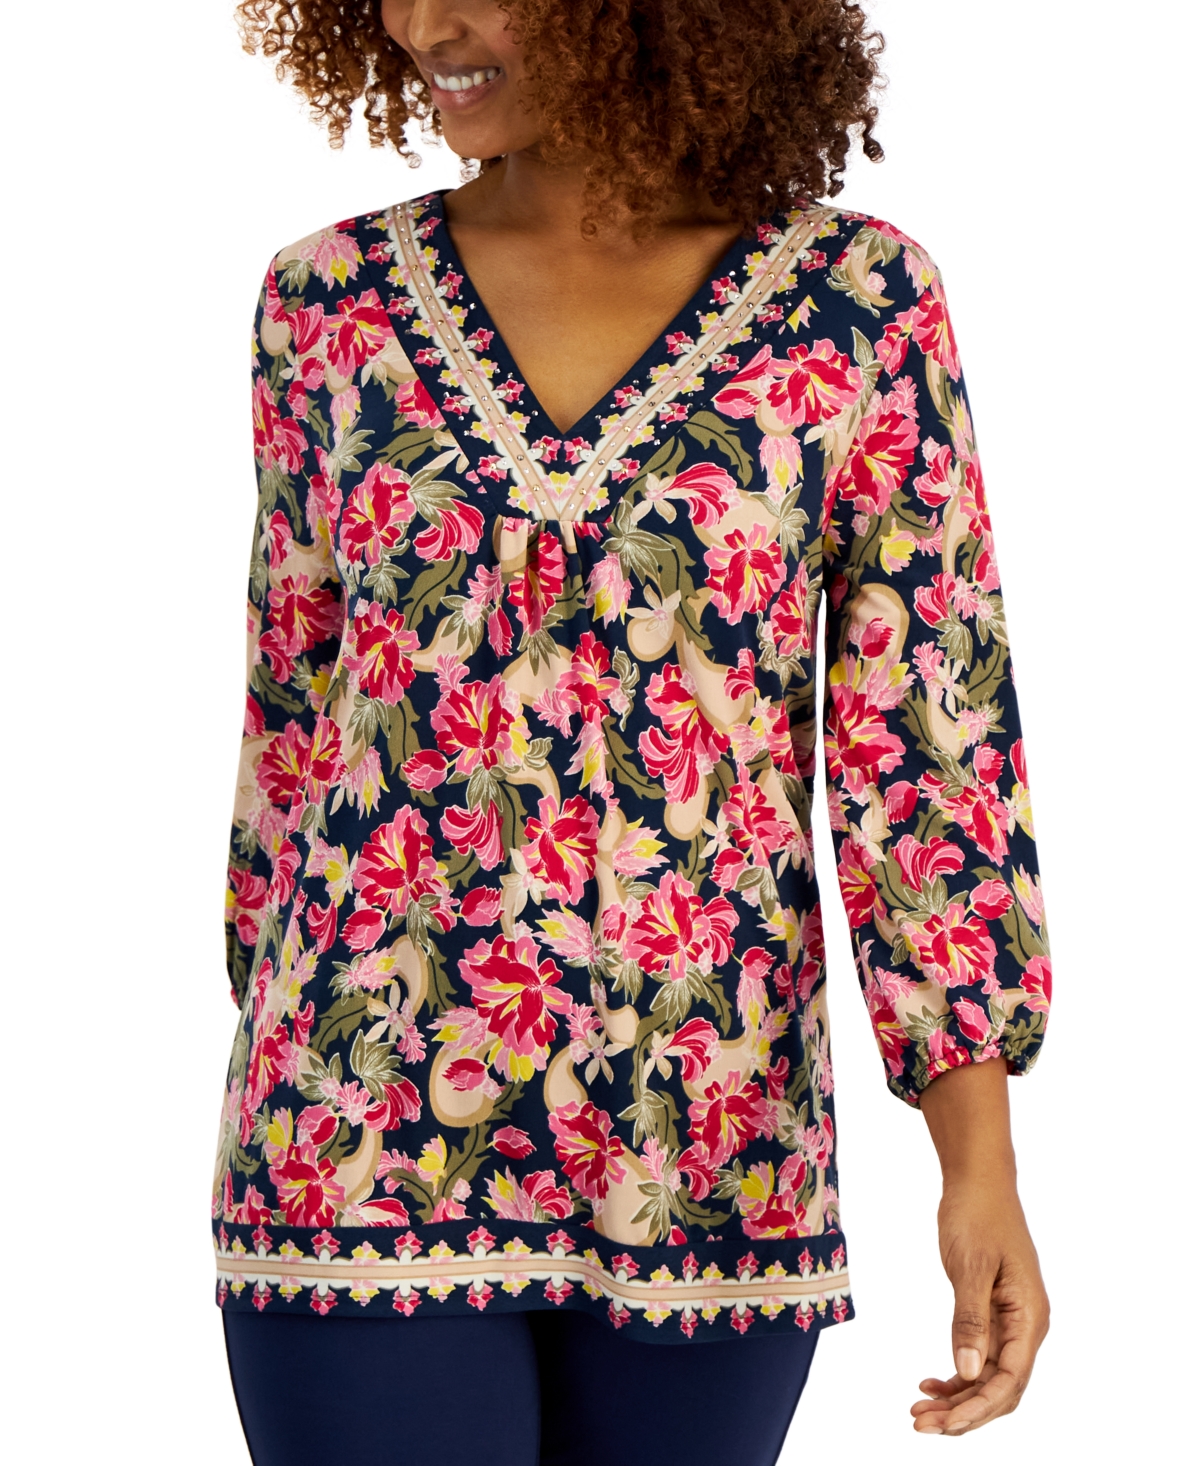 Petite Floral V Neck 3/4-Sleeve Top, Created for Macy's - Intrepid Blue Combo